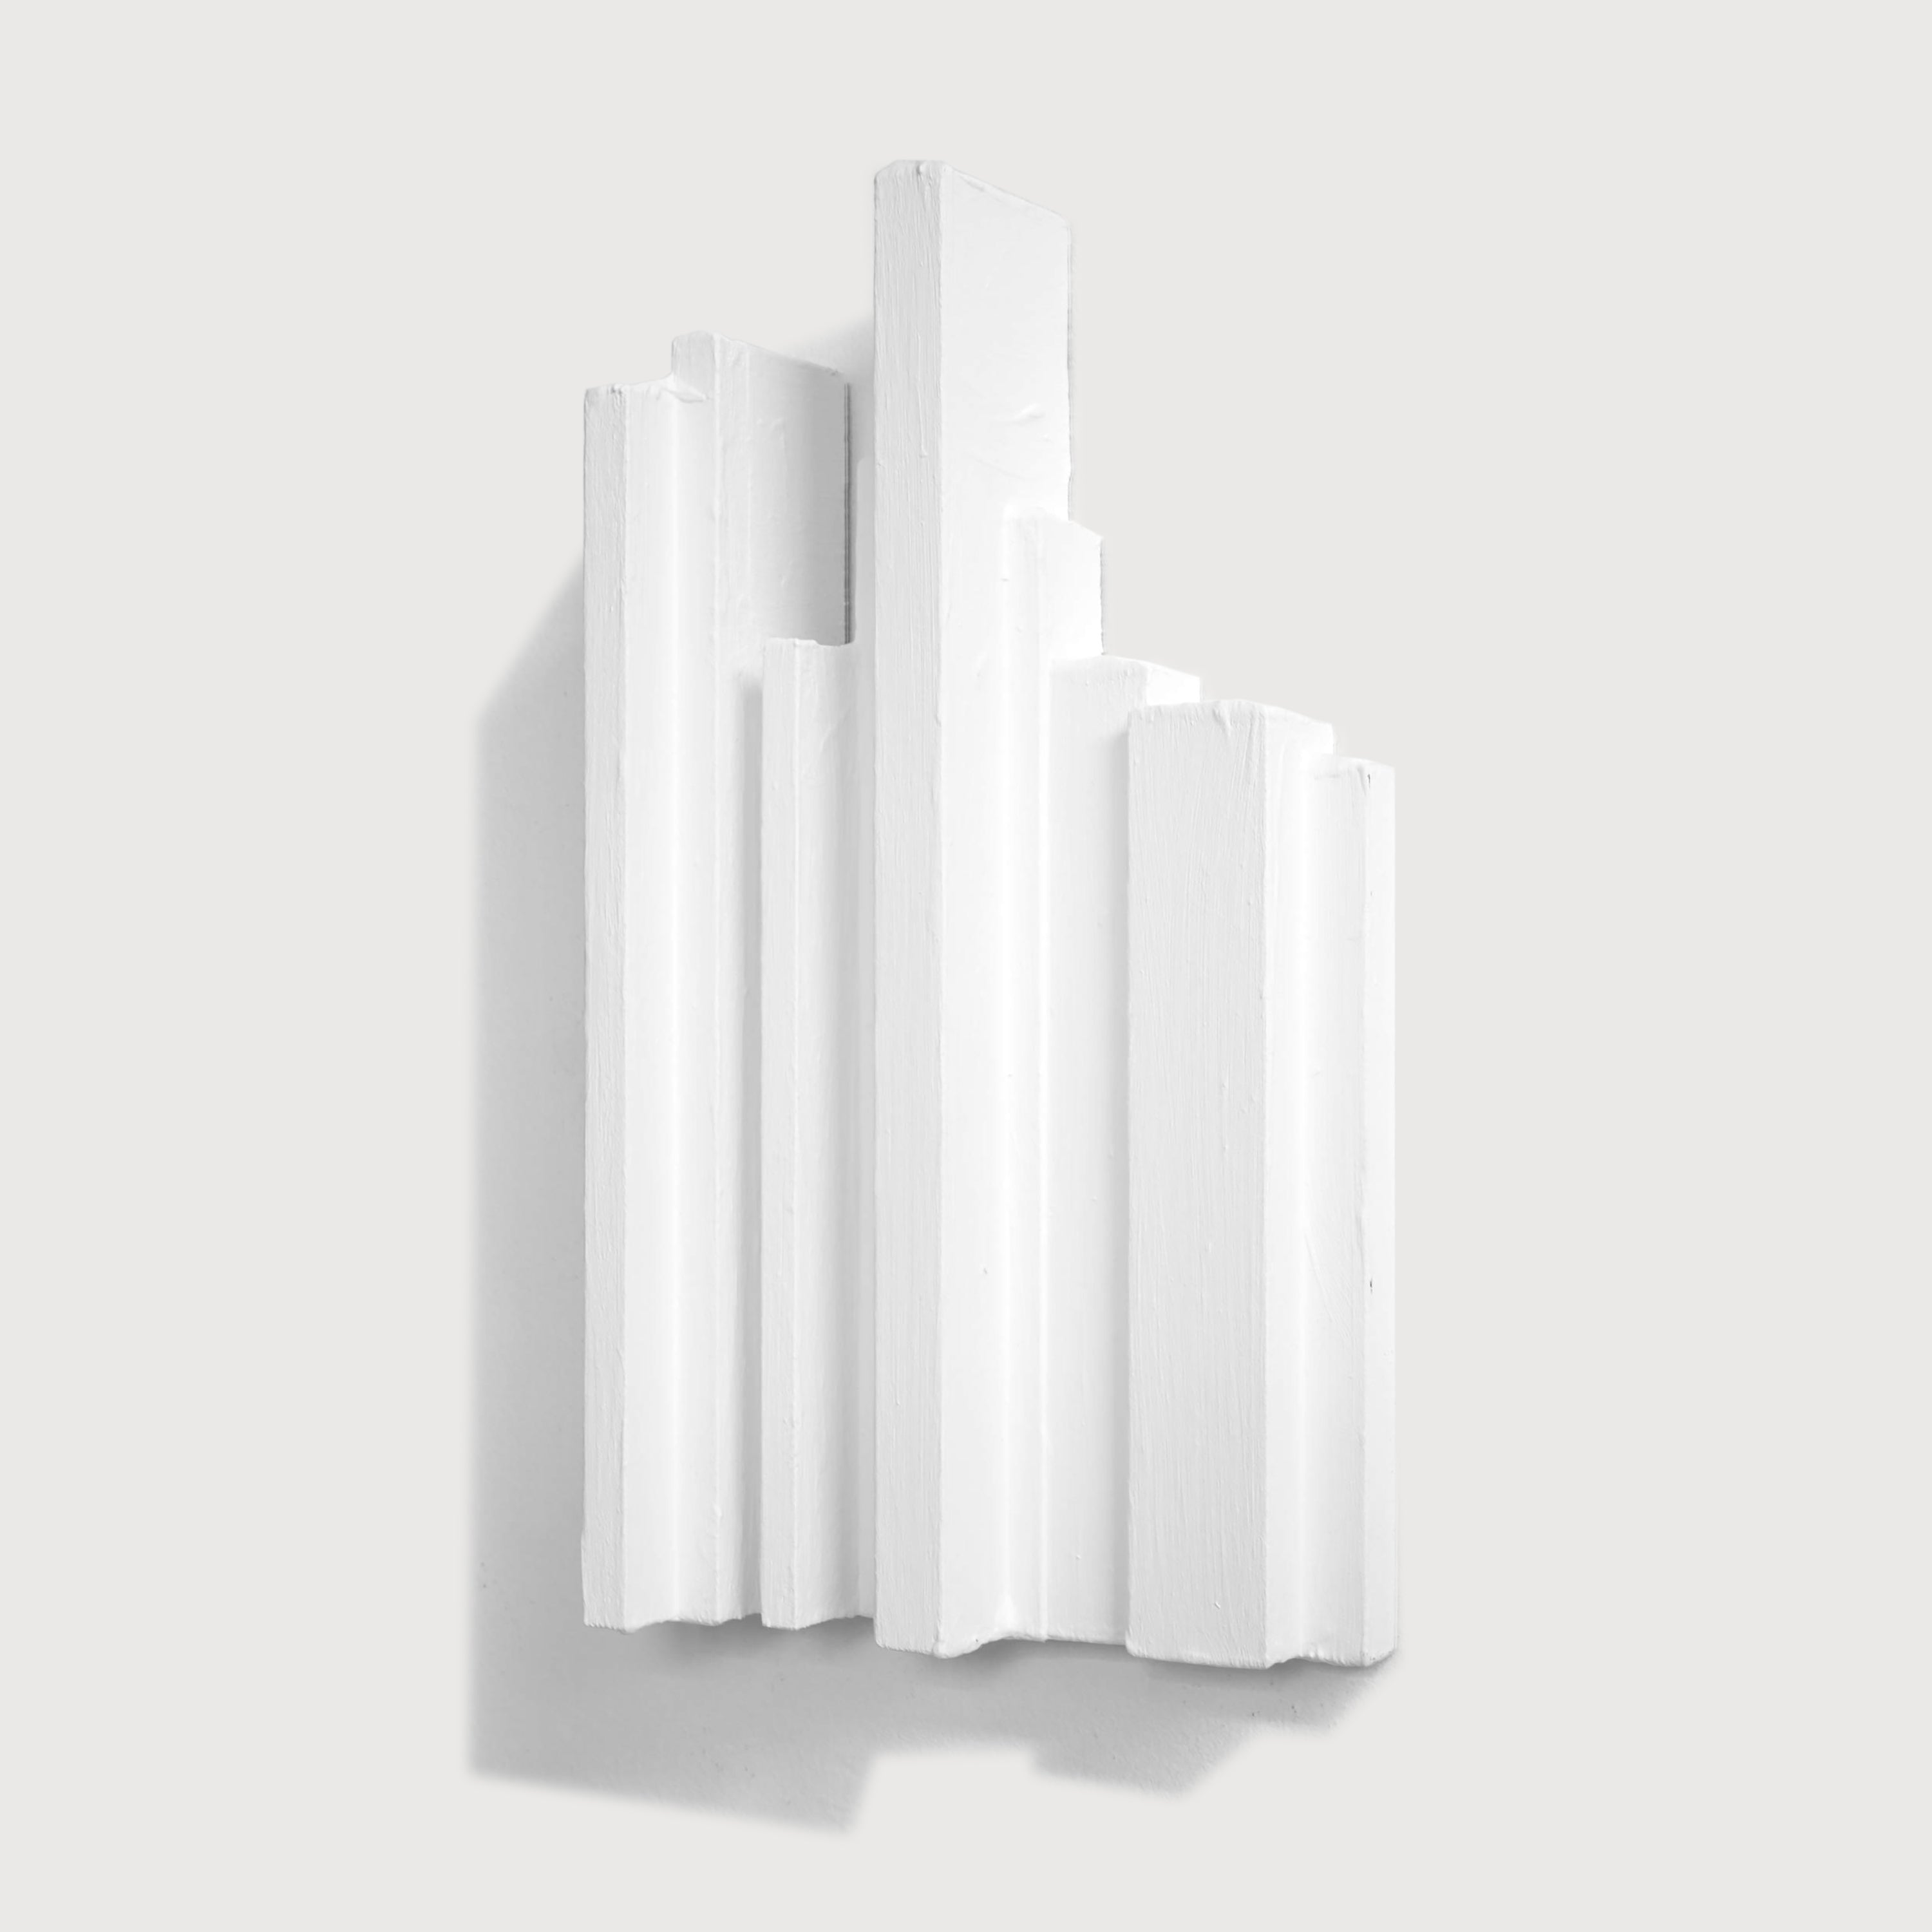 Eleven White Boetti Spines / edition 2020 by Jonathan Monk second image